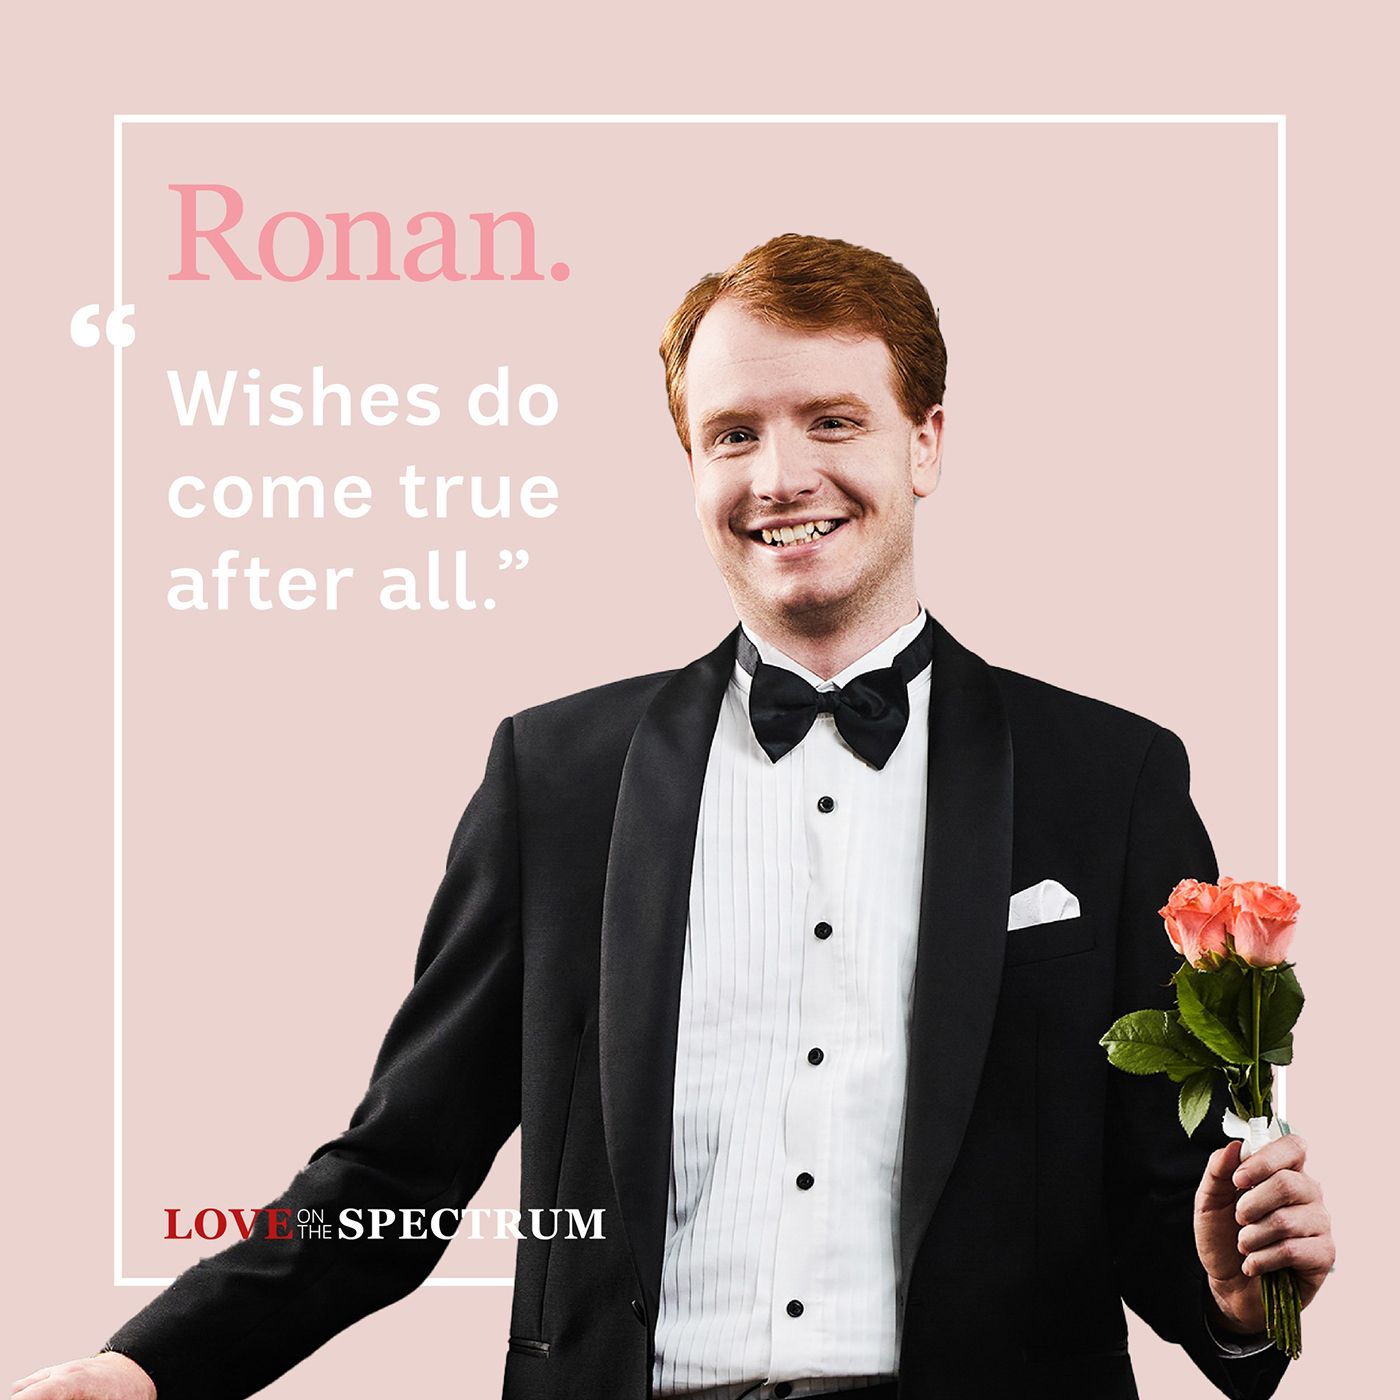 Ronan in a Love on the Spectrum meme, wearing a tux and holding flowers.